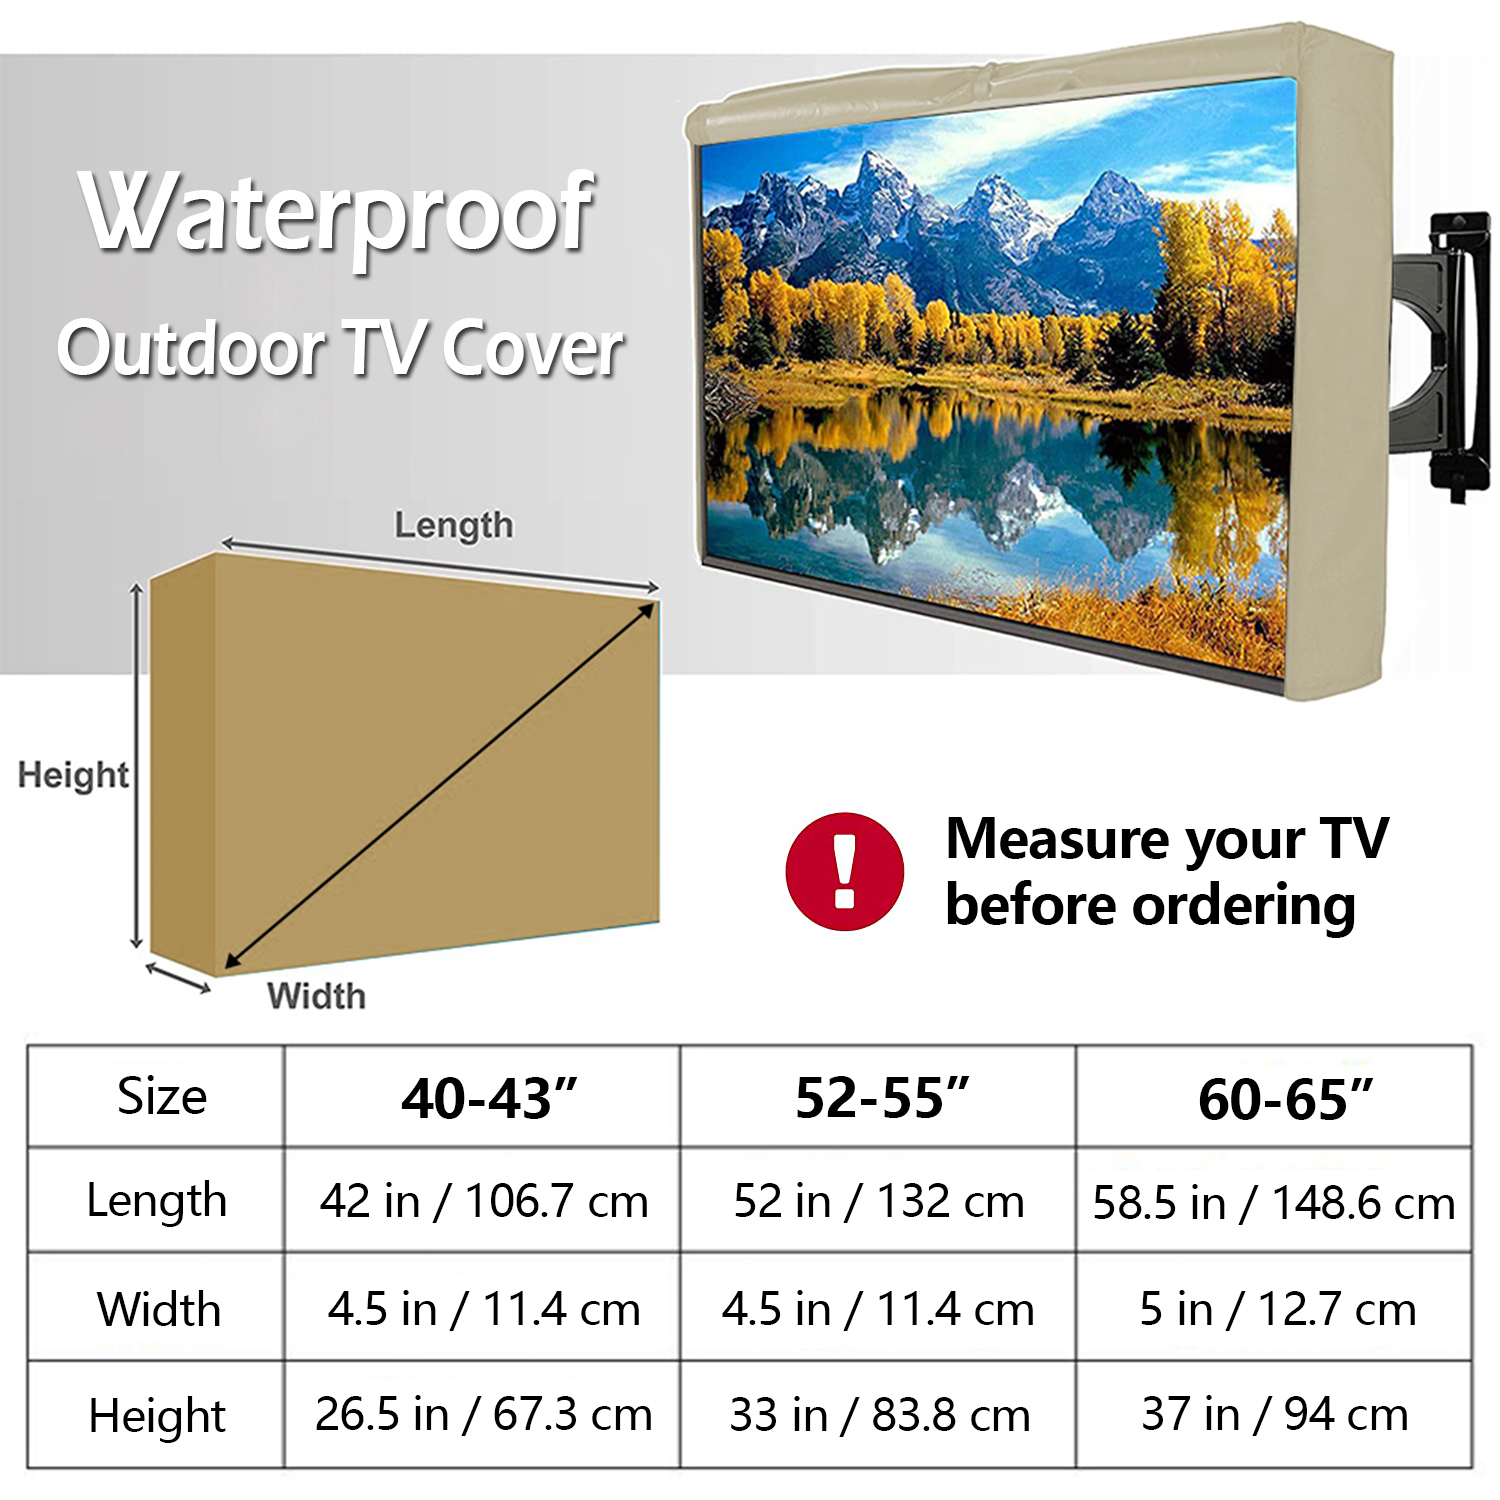 IC ICLOVER 60"-65" Outdoor Weatherproof LCD Plasma TV/Television Cover Flat Screen TV/Television Dustproof Protector with Waterproof Remote Pocket, Beige - image 3 of 9